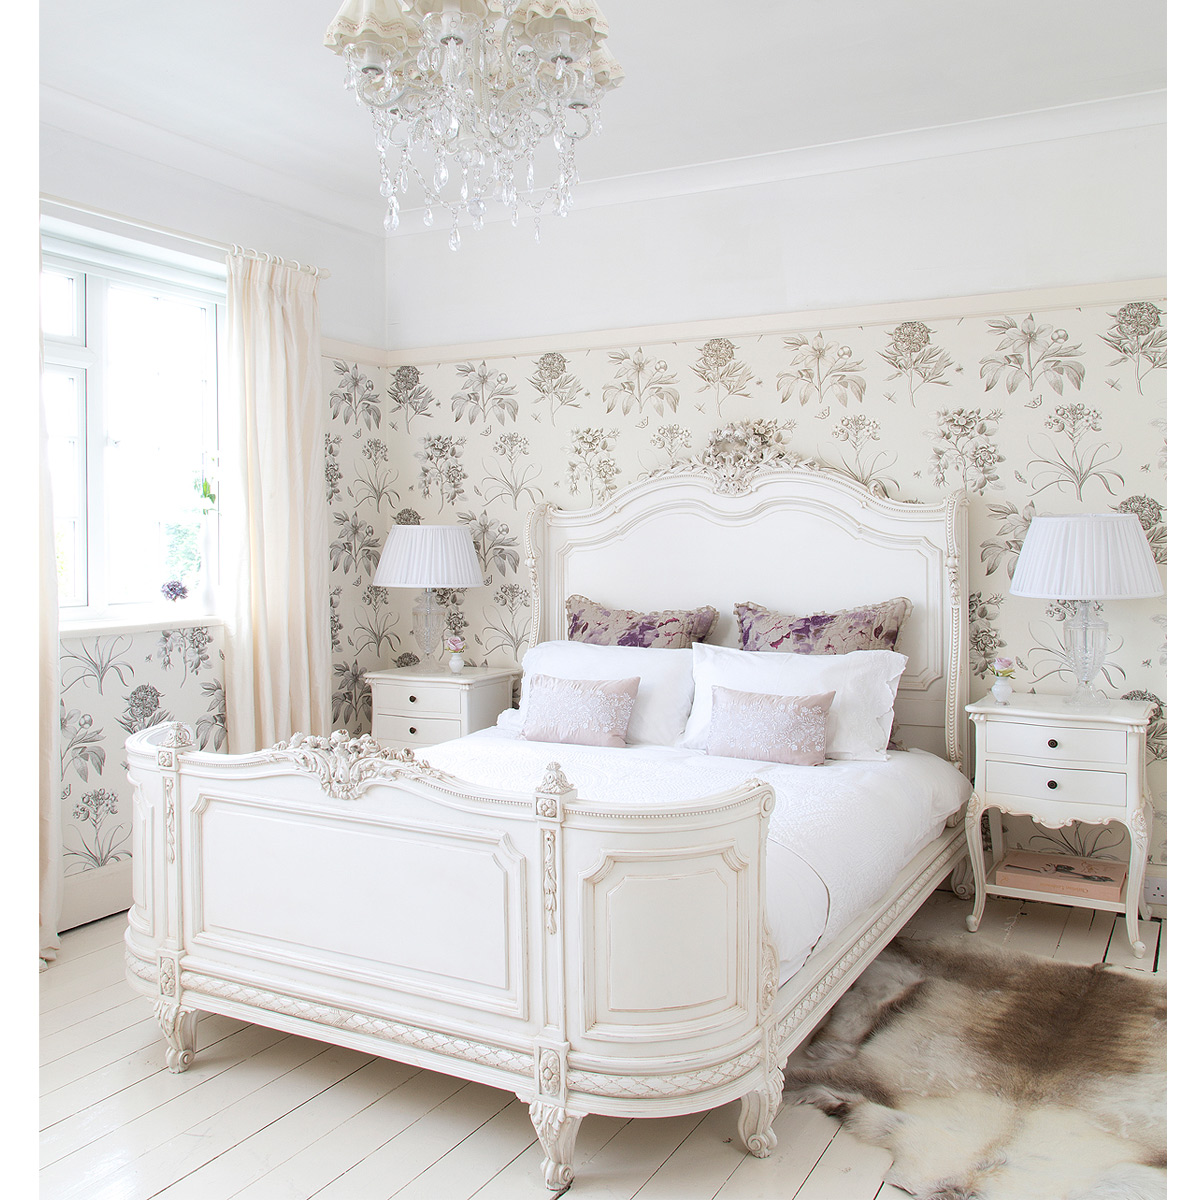 Provencal Bonaparte French Bed Image By The Bedroom Pany